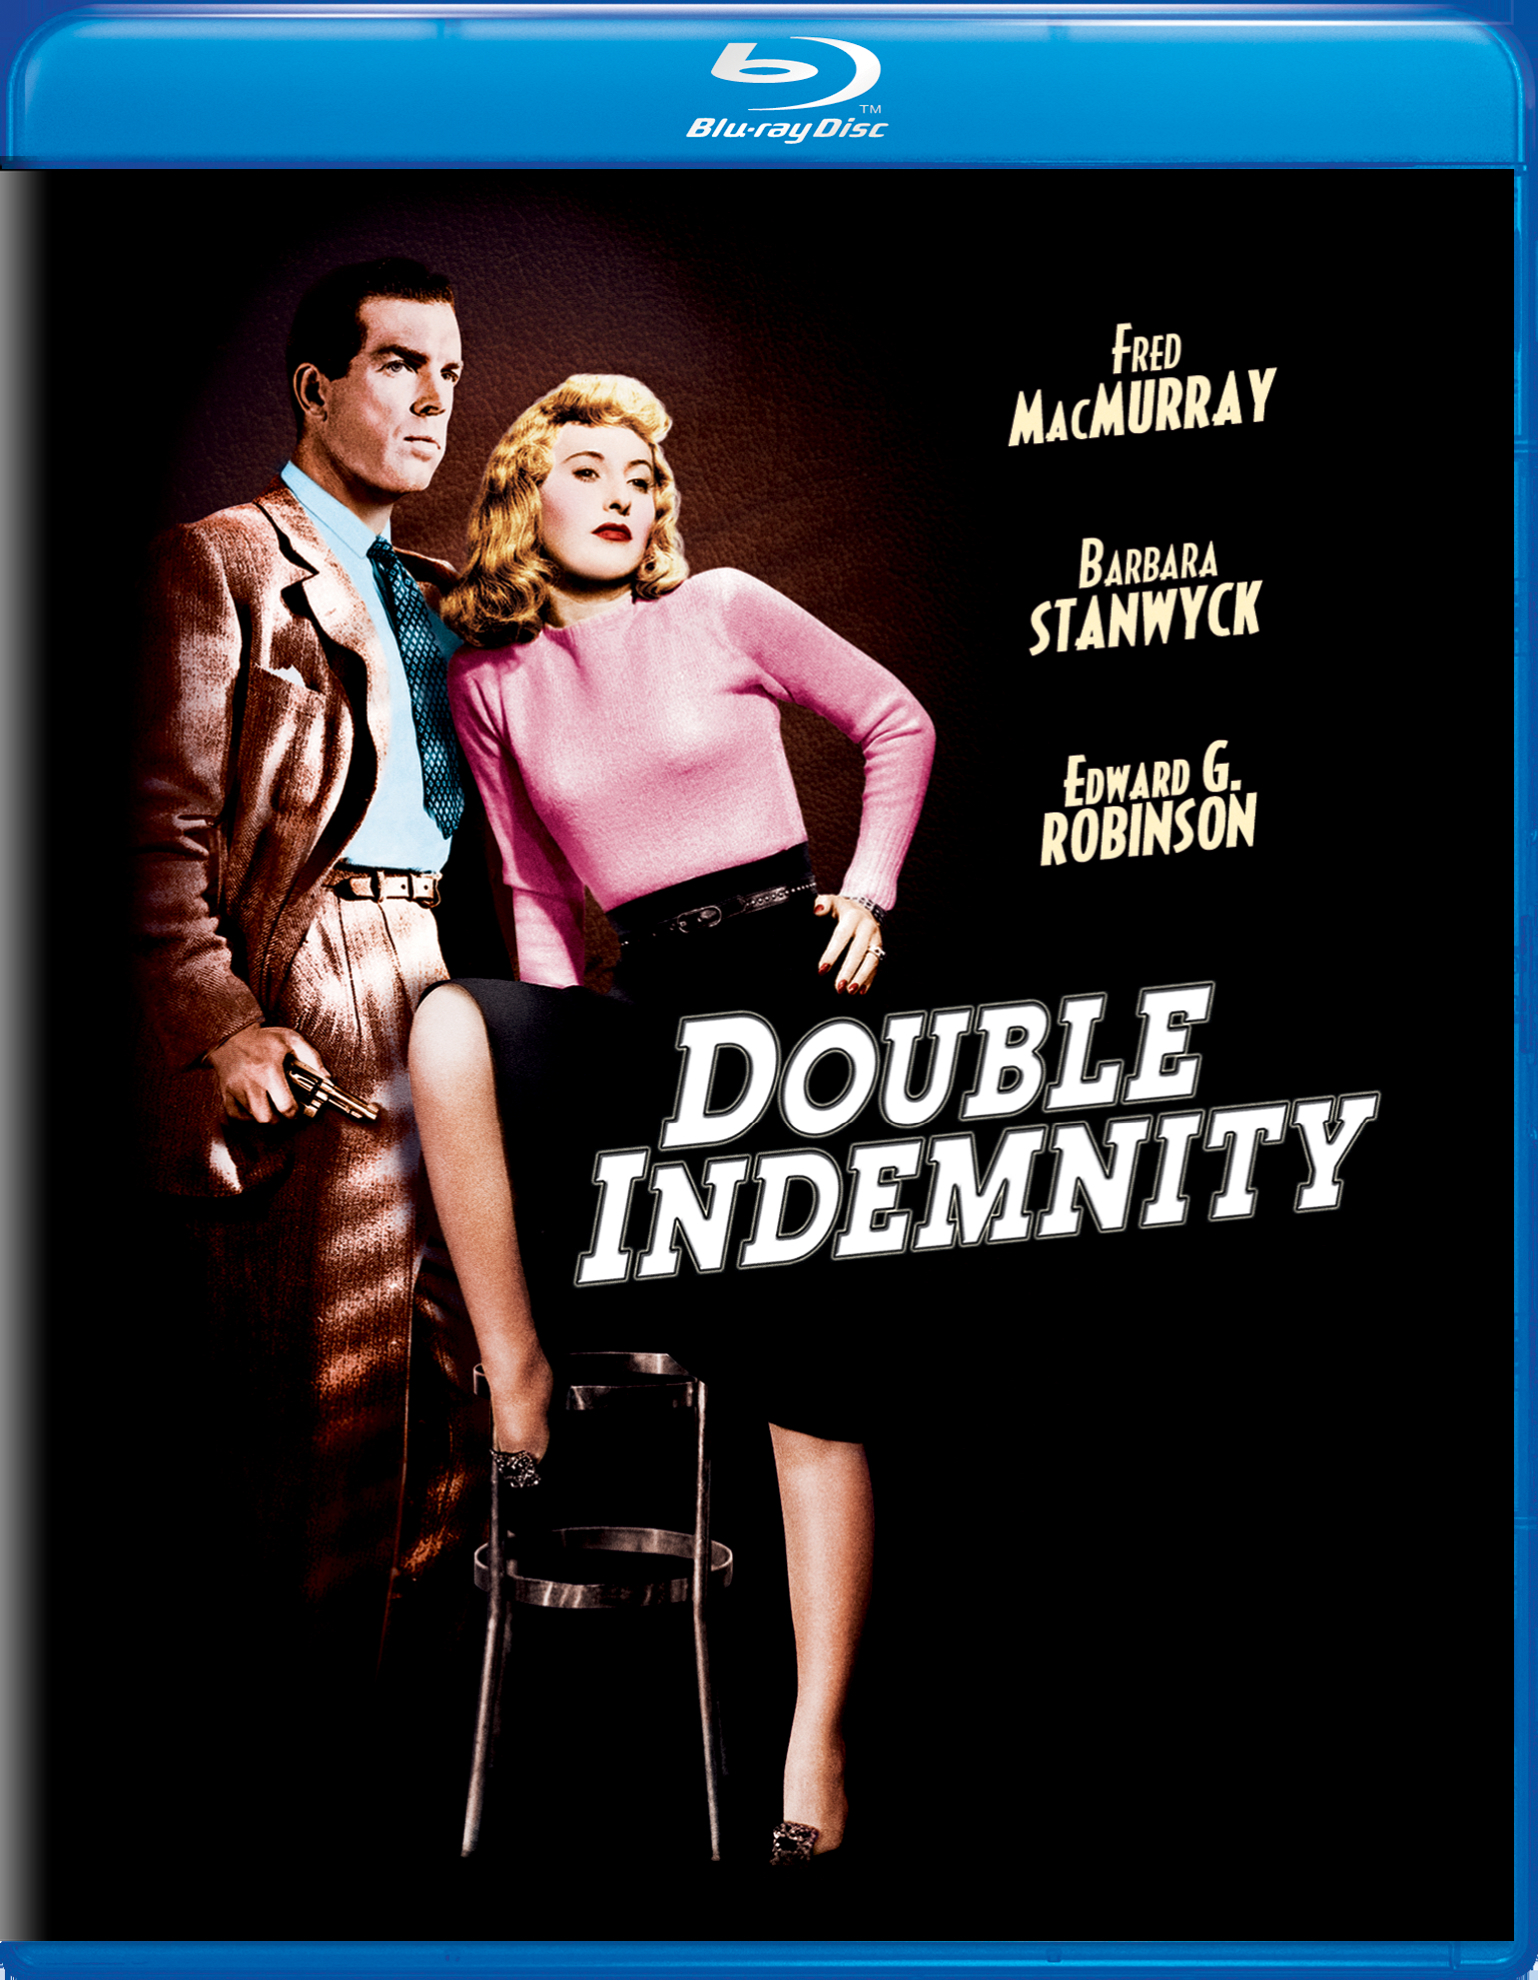 Double Indemnity - Blu-ray [ 1944 ]  - Classic Movies On Blu-ray - Movies On GRUV